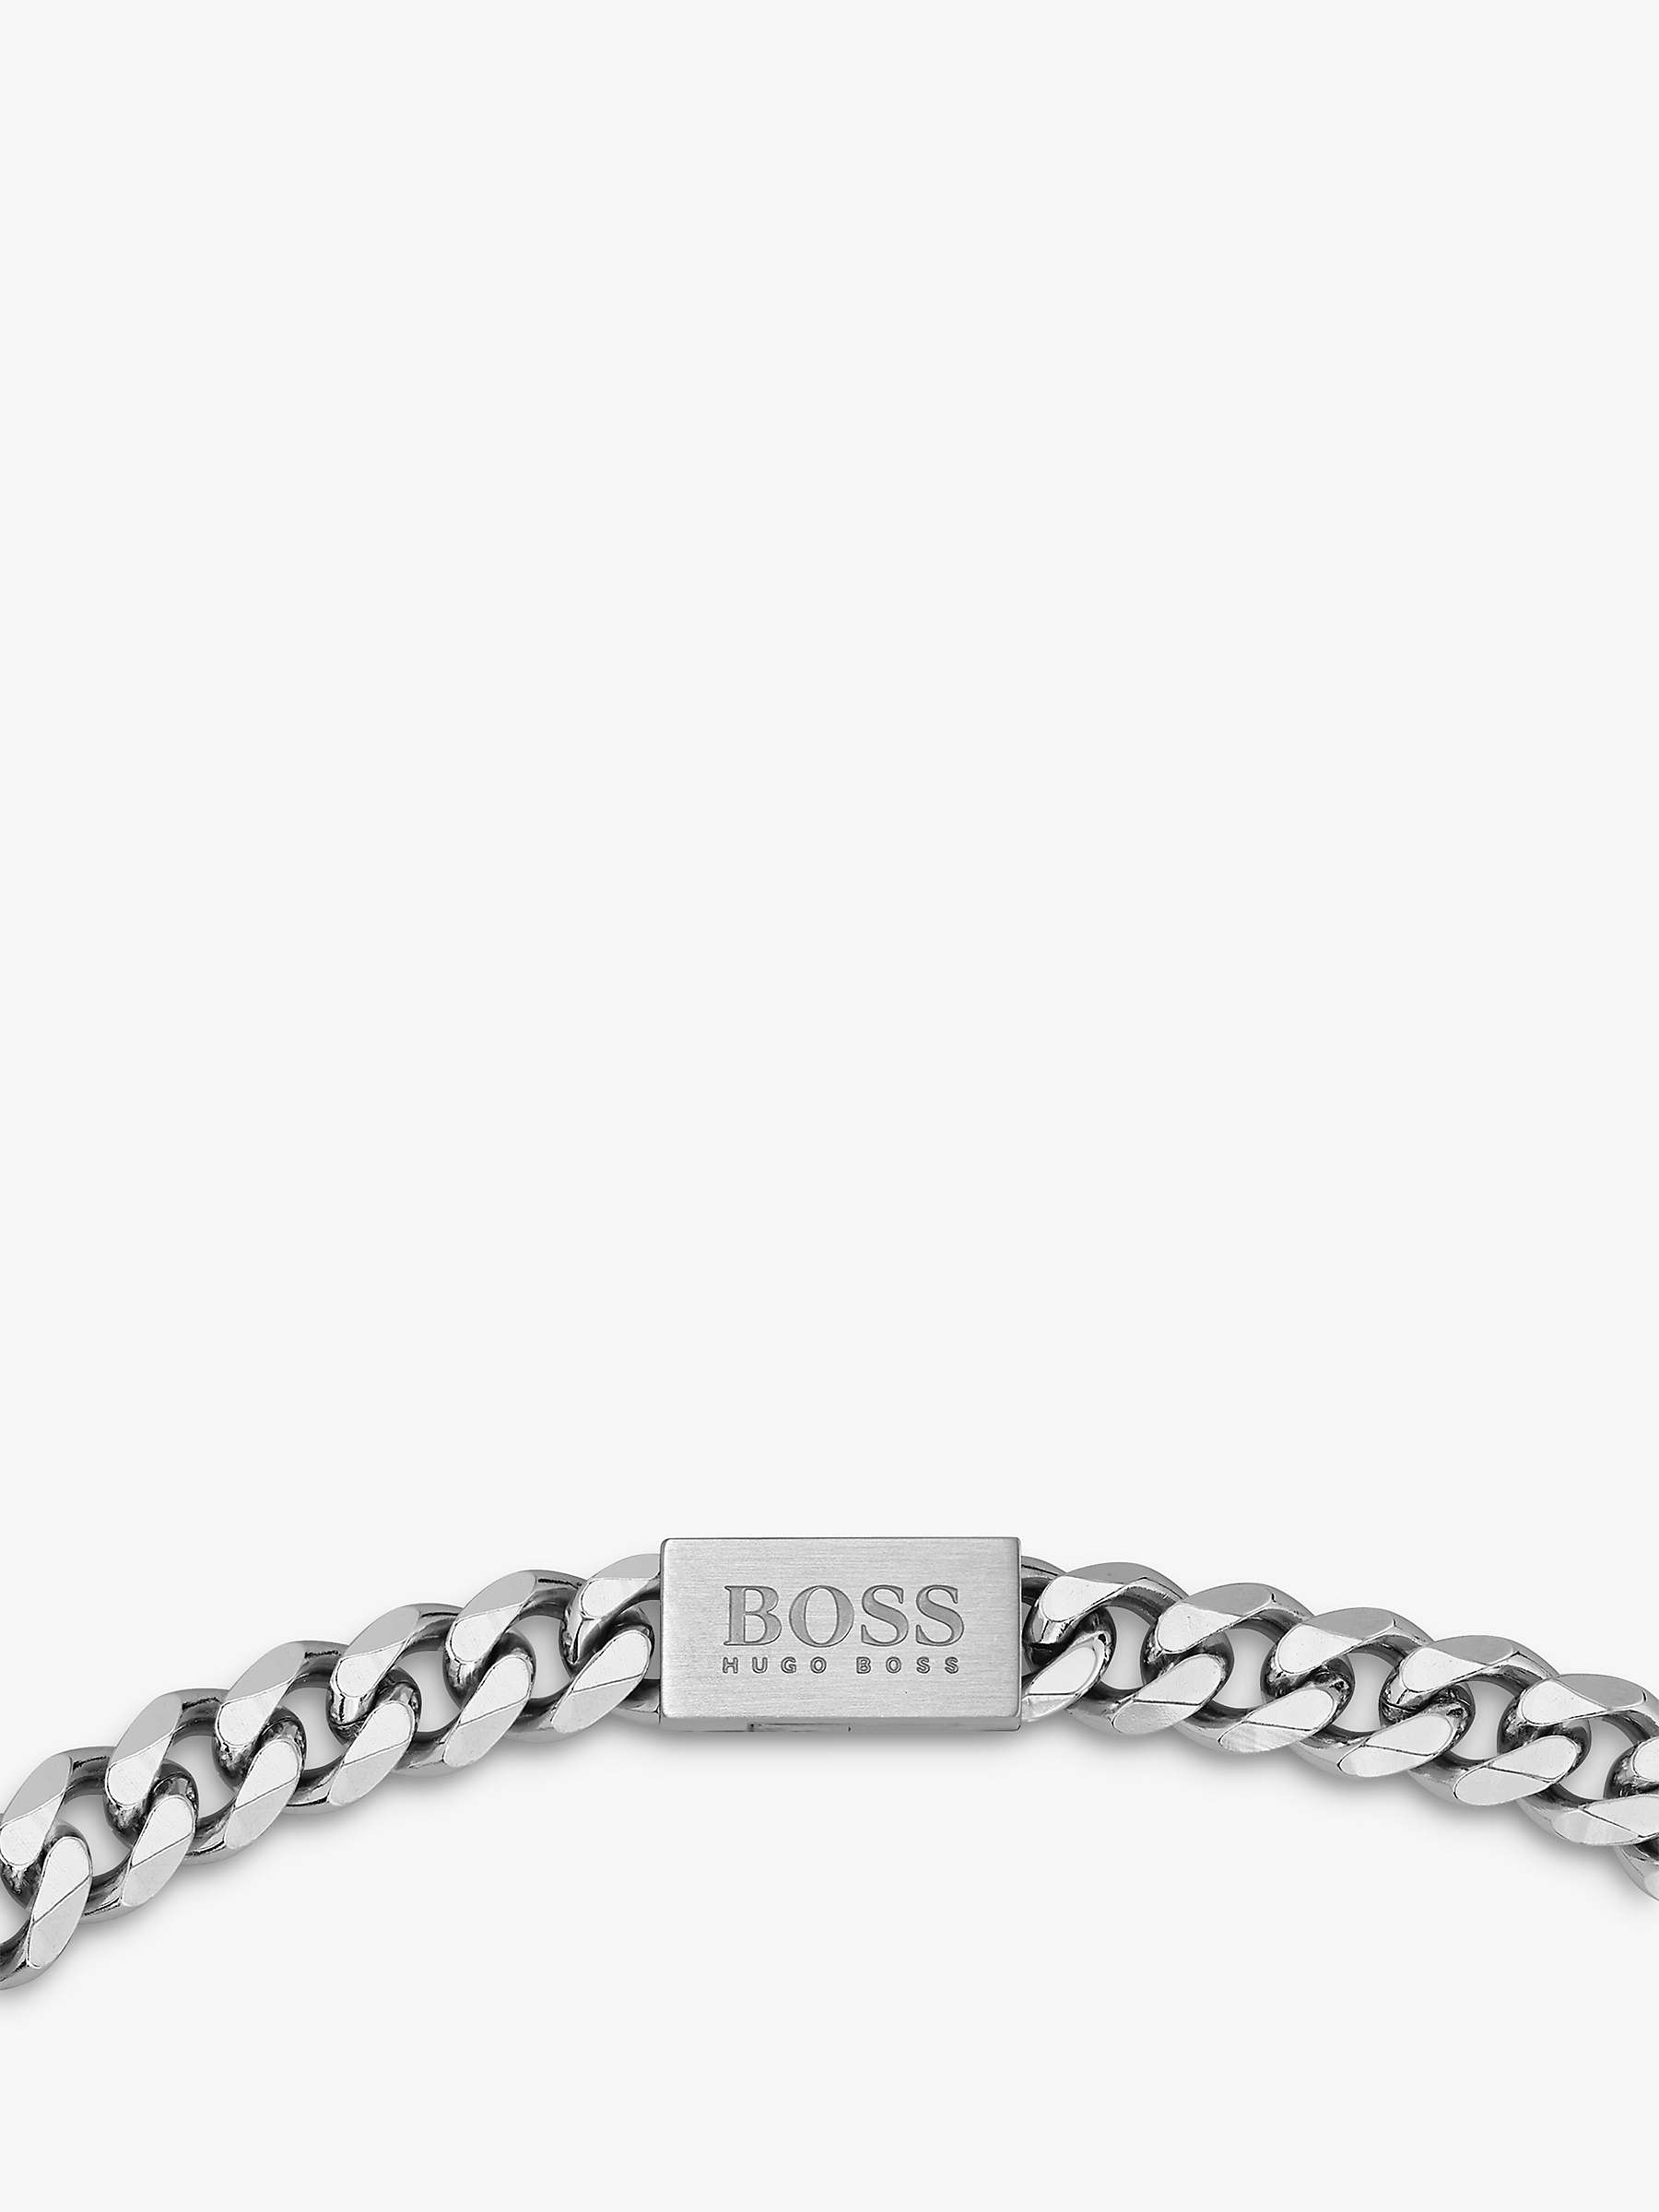 BOSS by HUGO BOSS Boss Curb Chain Necklace in Silver for Men Metallic Mens Jewellery Necklaces 